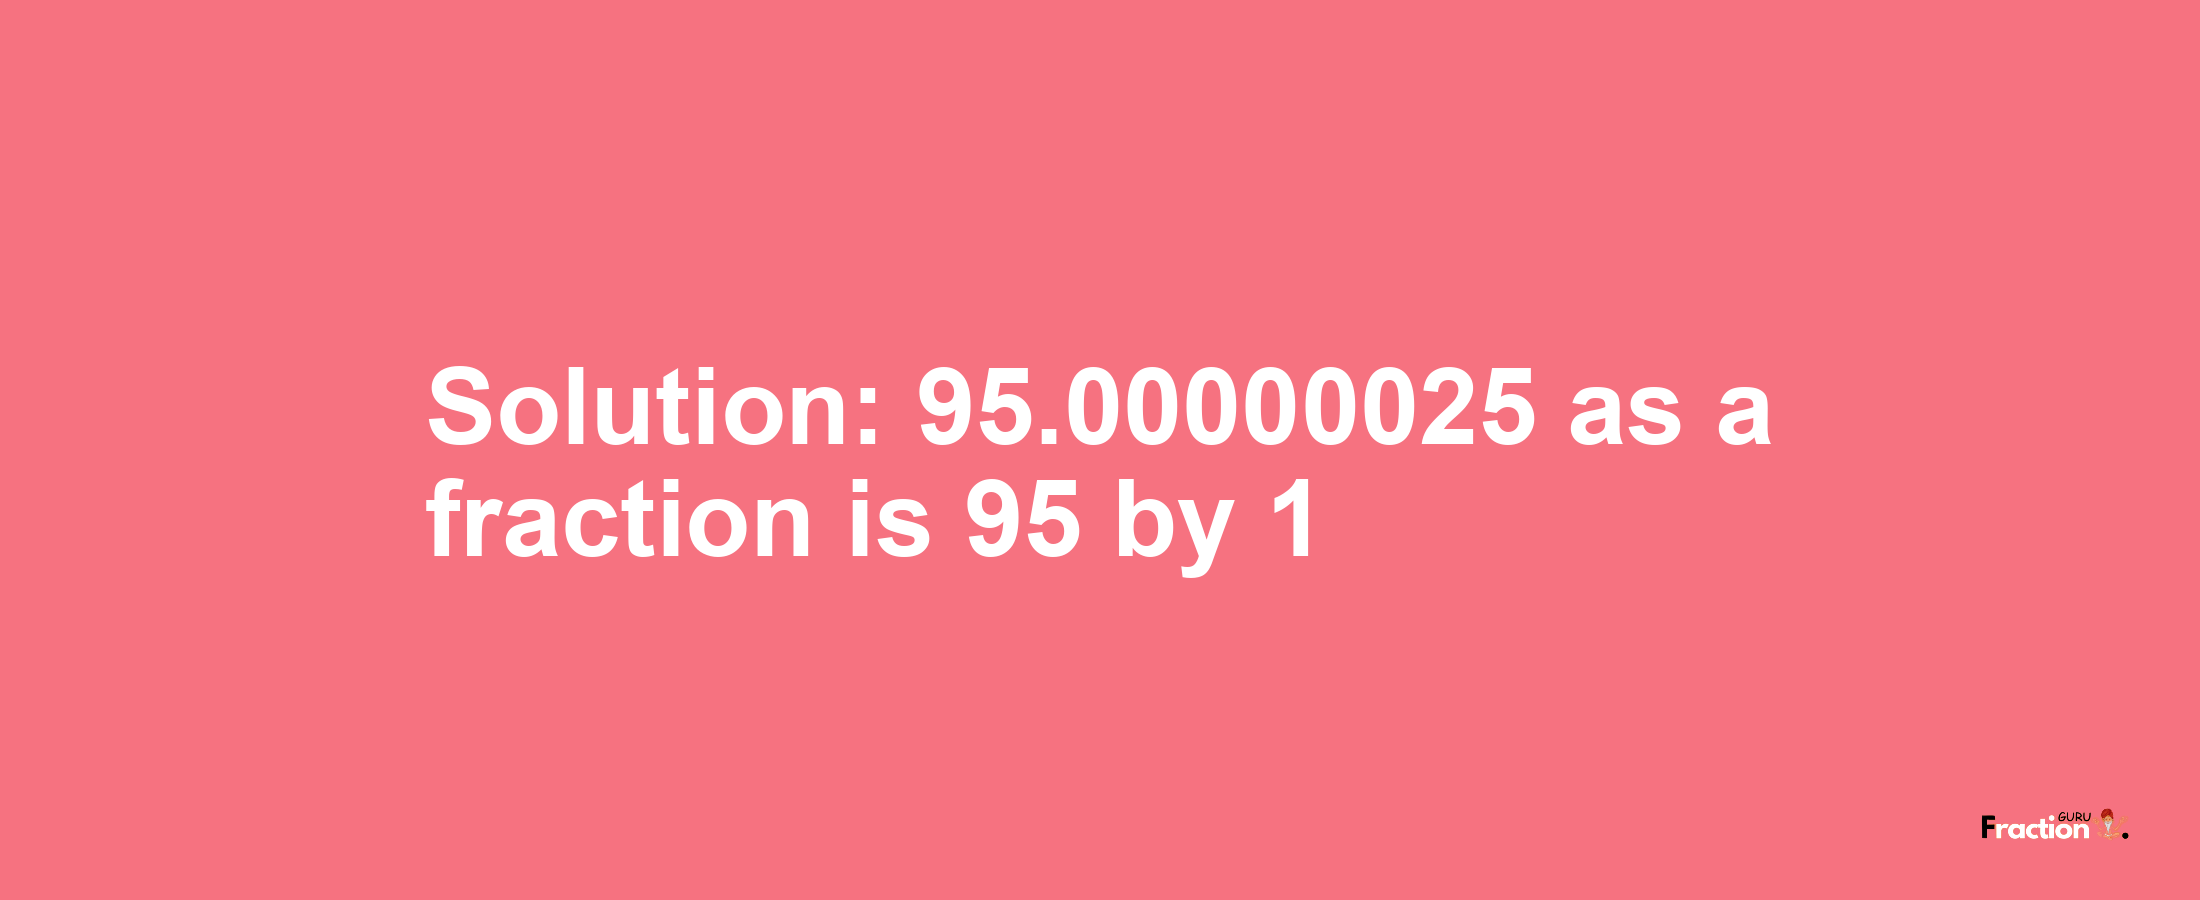 Solution:95.00000025 as a fraction is 95/1